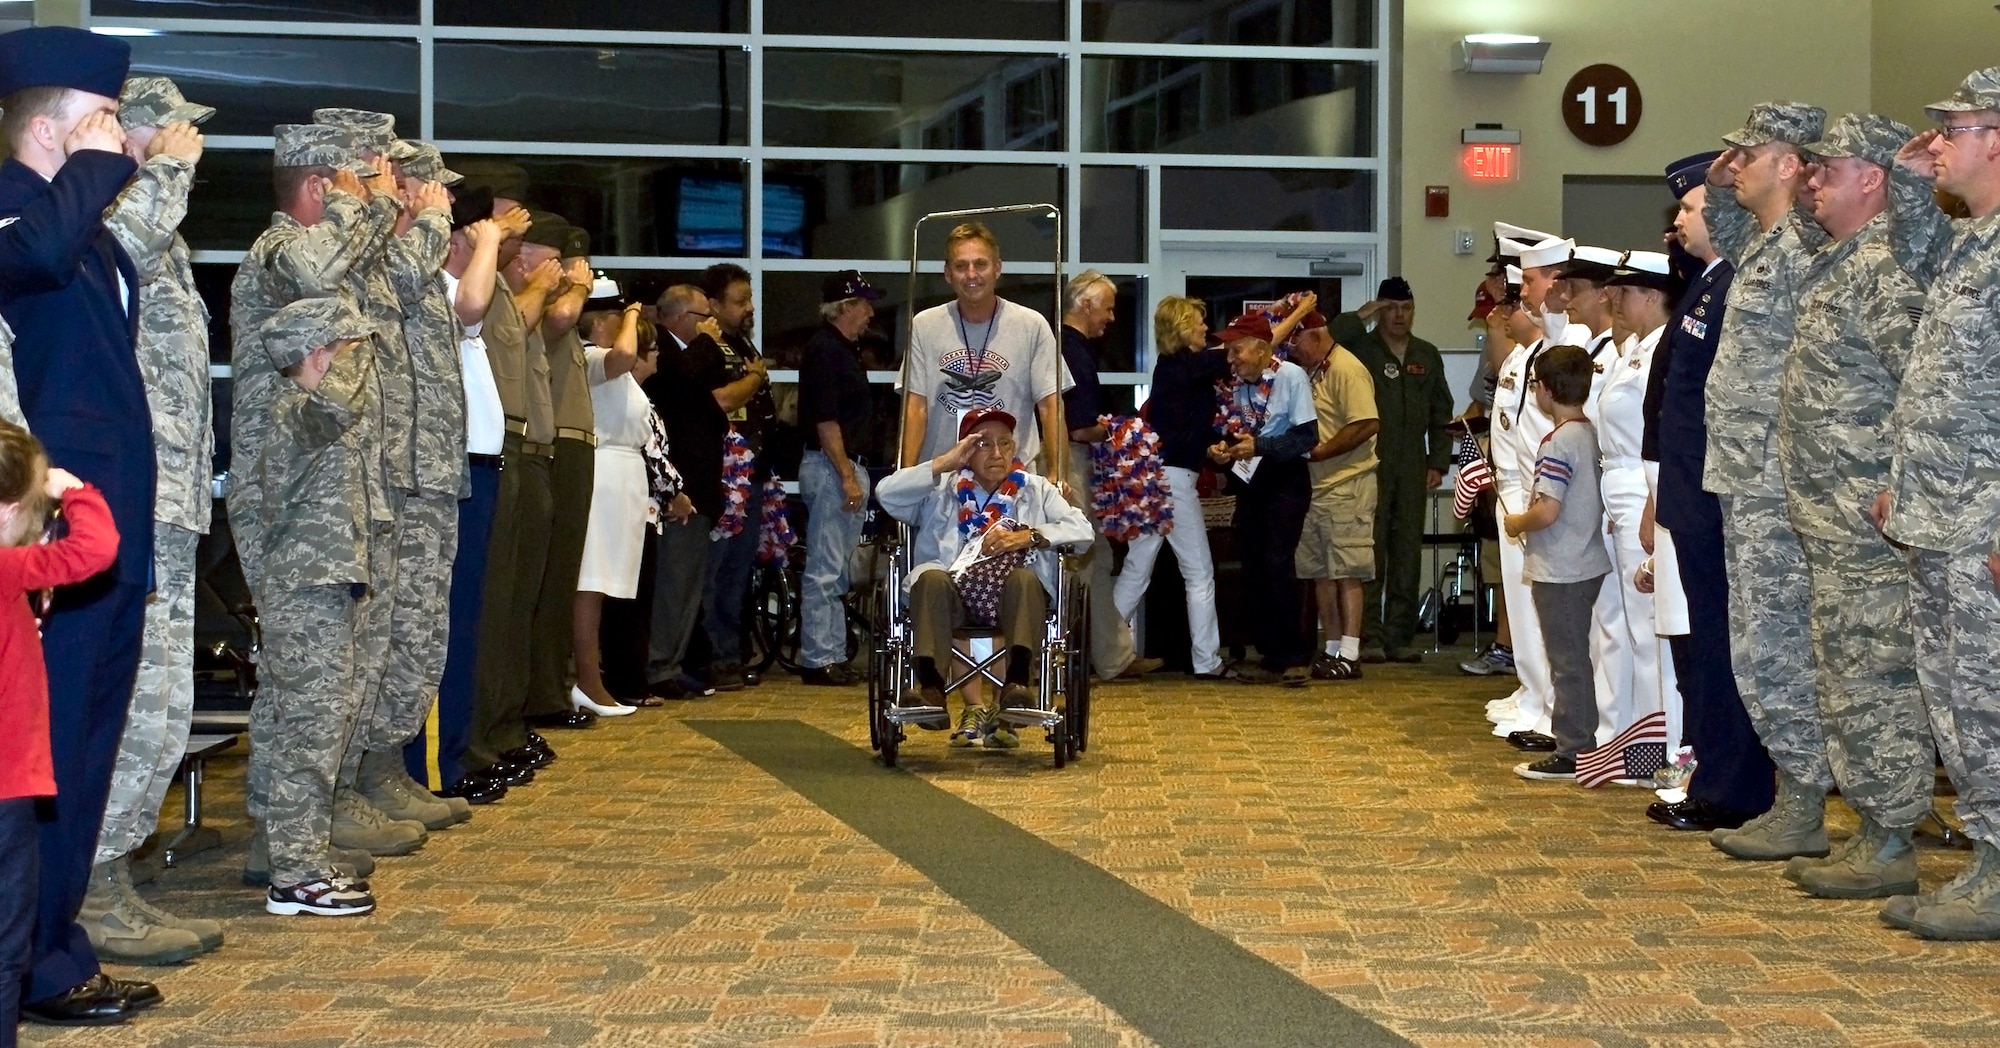 Member of the Illinois Air National Guard's 182nd Airlift Wing and fellow service members salute a U.S. Armed Forces veteran as he makes his return home from the inaugural Greater Peoria Honor Flight at the General Wayne A. Downing Peoria International Airport in Peoria, Ill., June 4, 2013. The photo was one of five by Staff Sgt. Lealan C. Buehrer, photojournalist with the 182nd Airlift Wing, submitted to the National Guard Bureau media contest. Buehrer was announced the winner of the Air National Guard Outstanding New Photographer category on Feb. 3, 2014. (U.S. Air National Guard photo by Staff Sgt. Lealan Buehrer/Released)